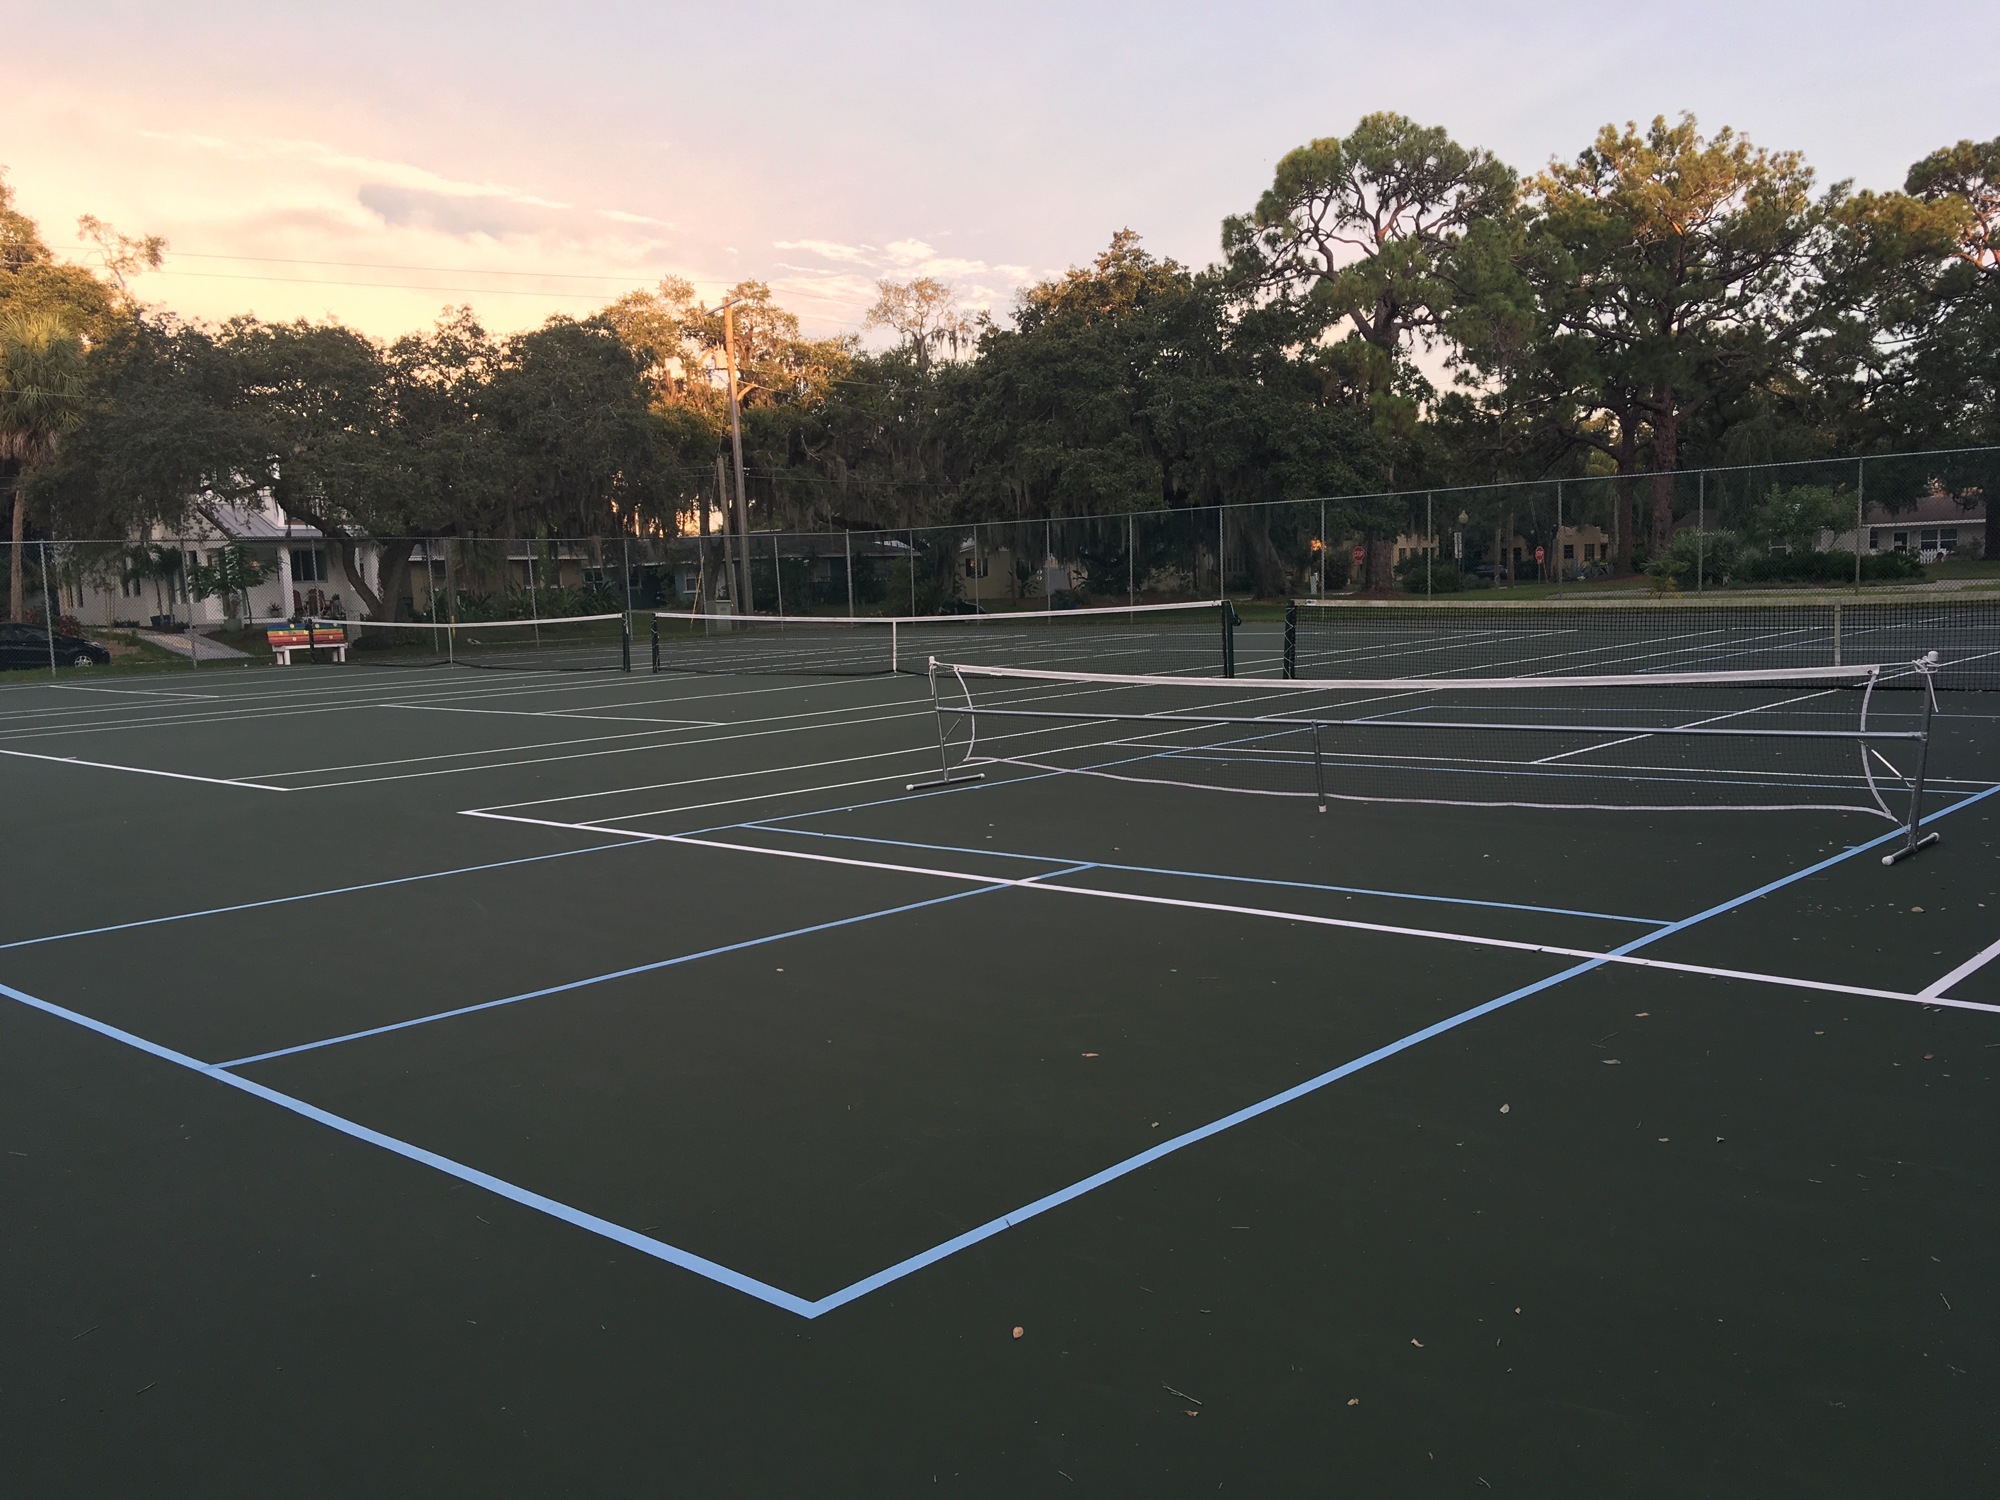 Municipalities and homeowners associations have converted tennis courts to pickleball courts to capitalize on the sport's growing popularity — including this public court in Gillespie Park.